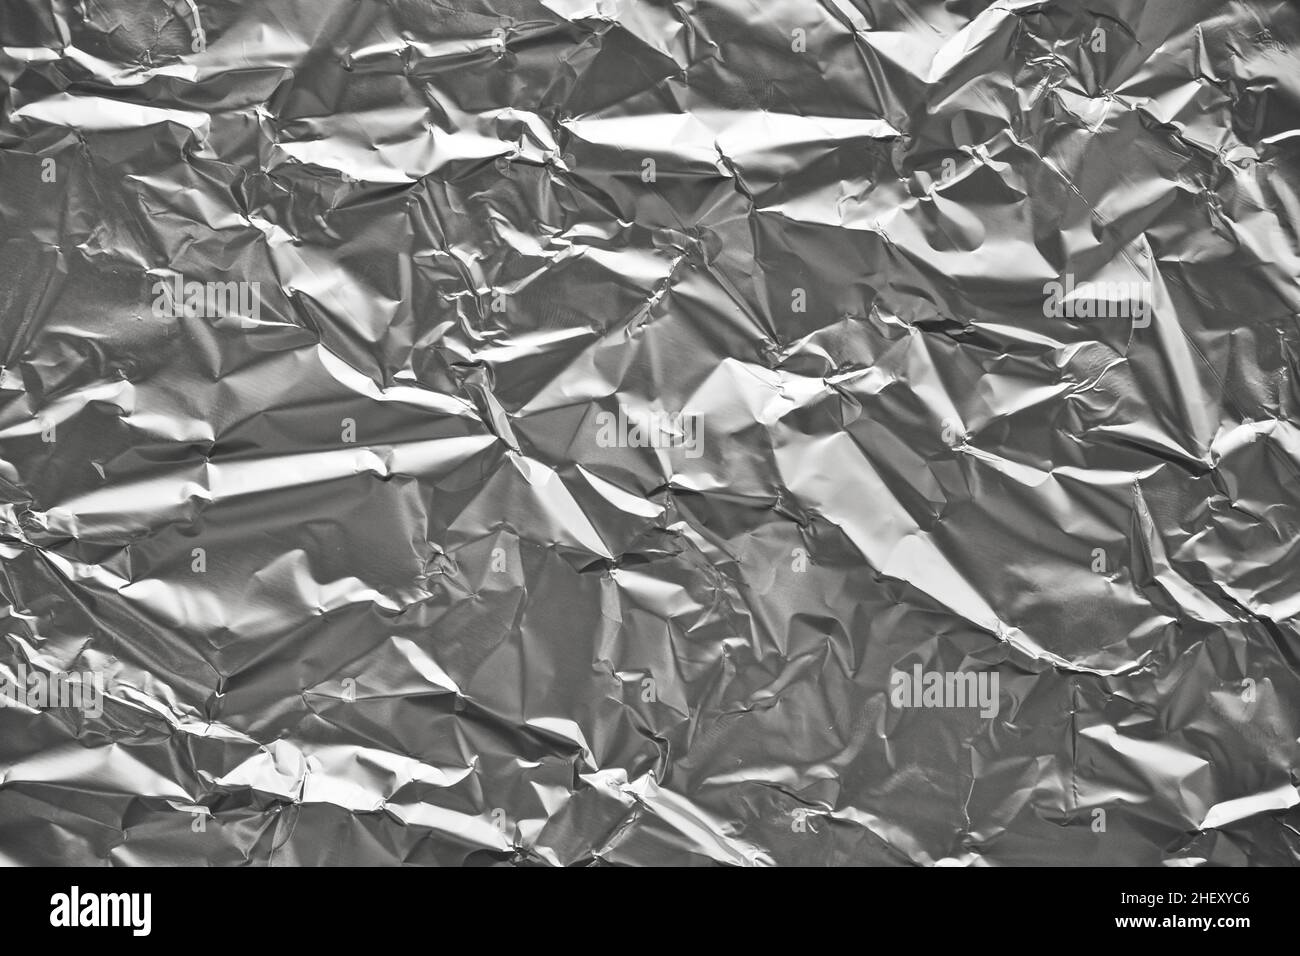 Close-up of crumpled silver aluminum foil texture. Abstract background for design. Stock Photo